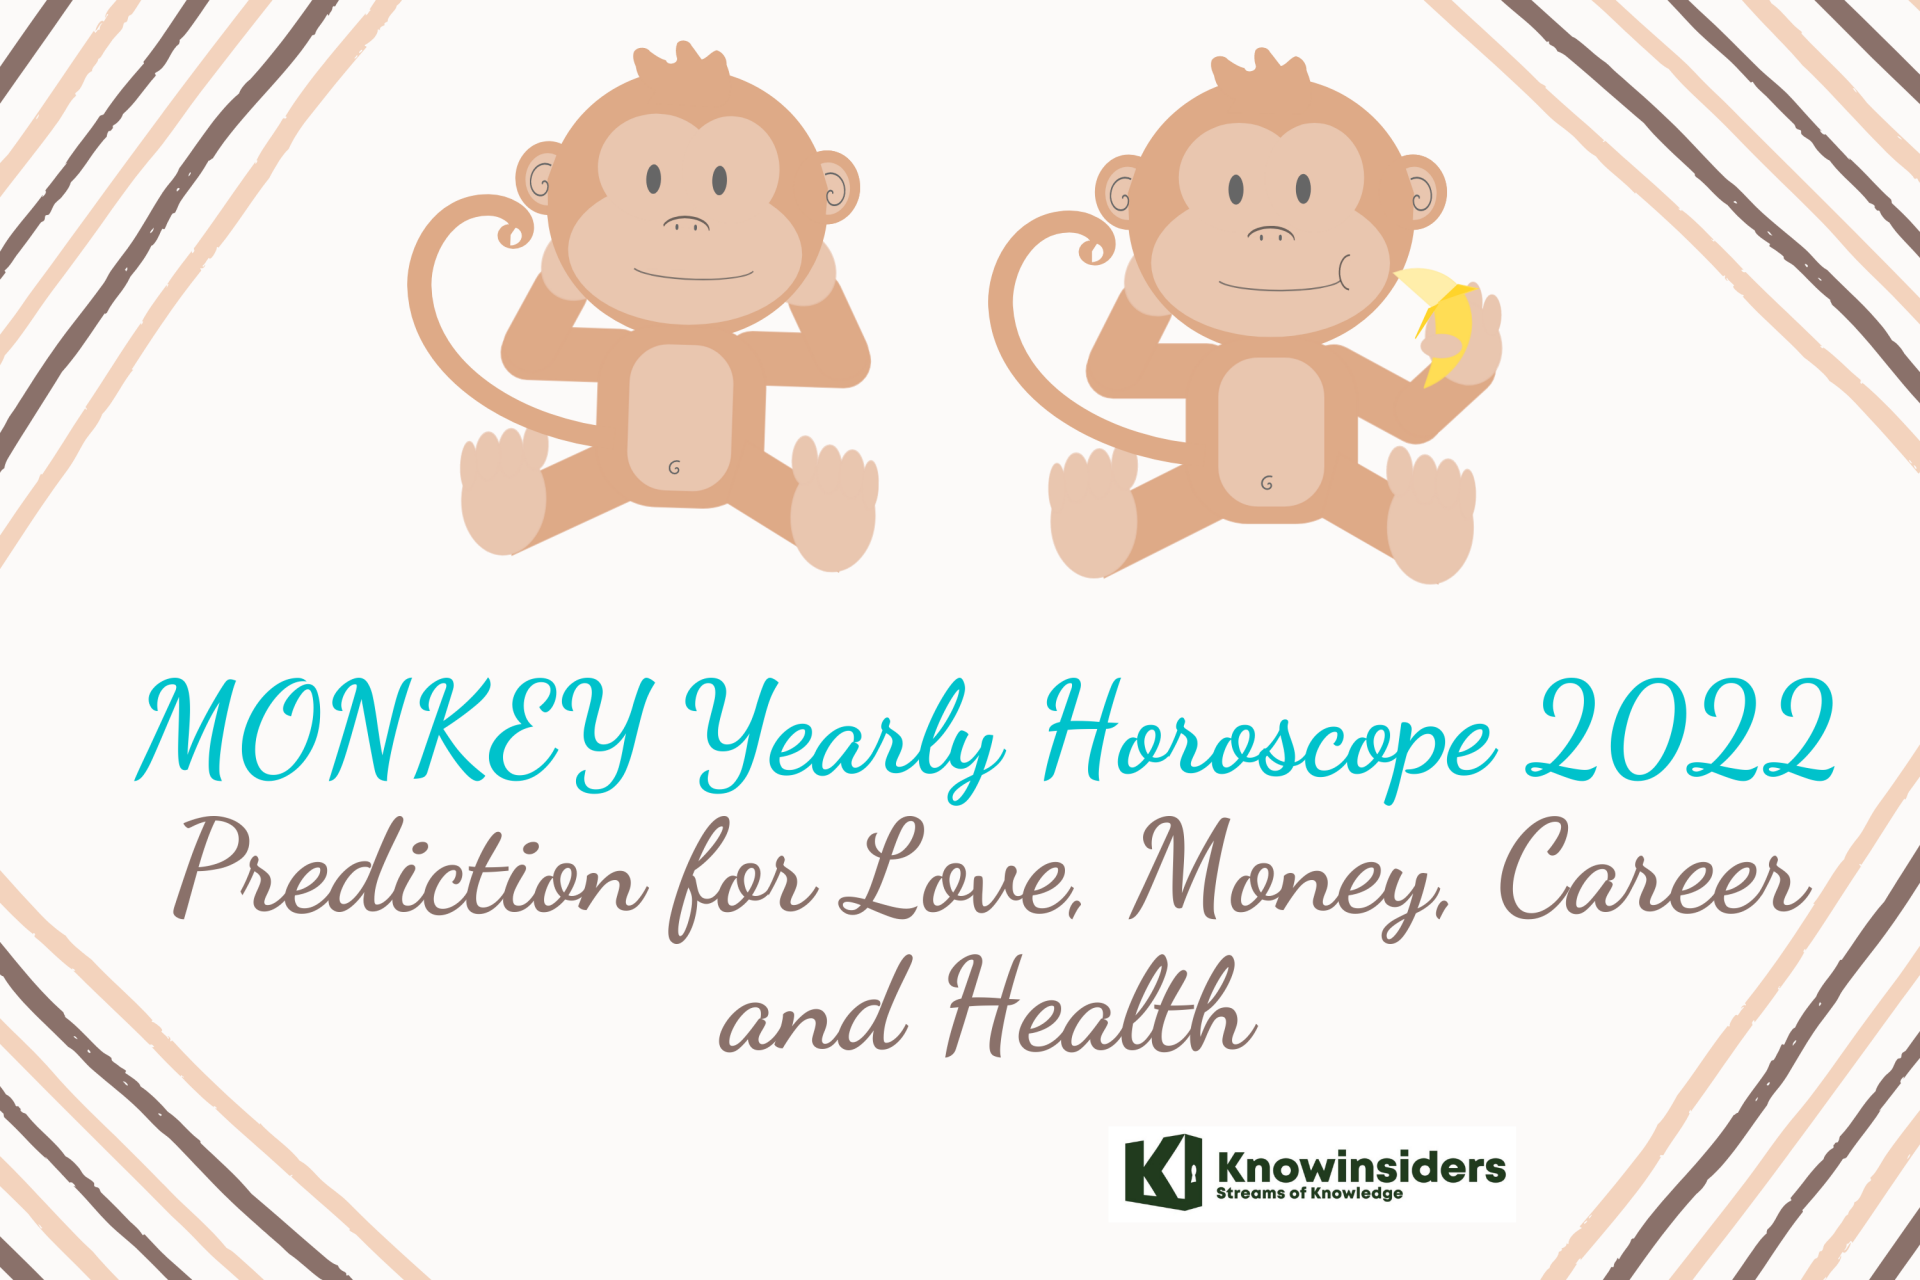 MONKEY Yearly Horoscope 2022 – Feng Shui Prediction for Love, Money, Career and Health